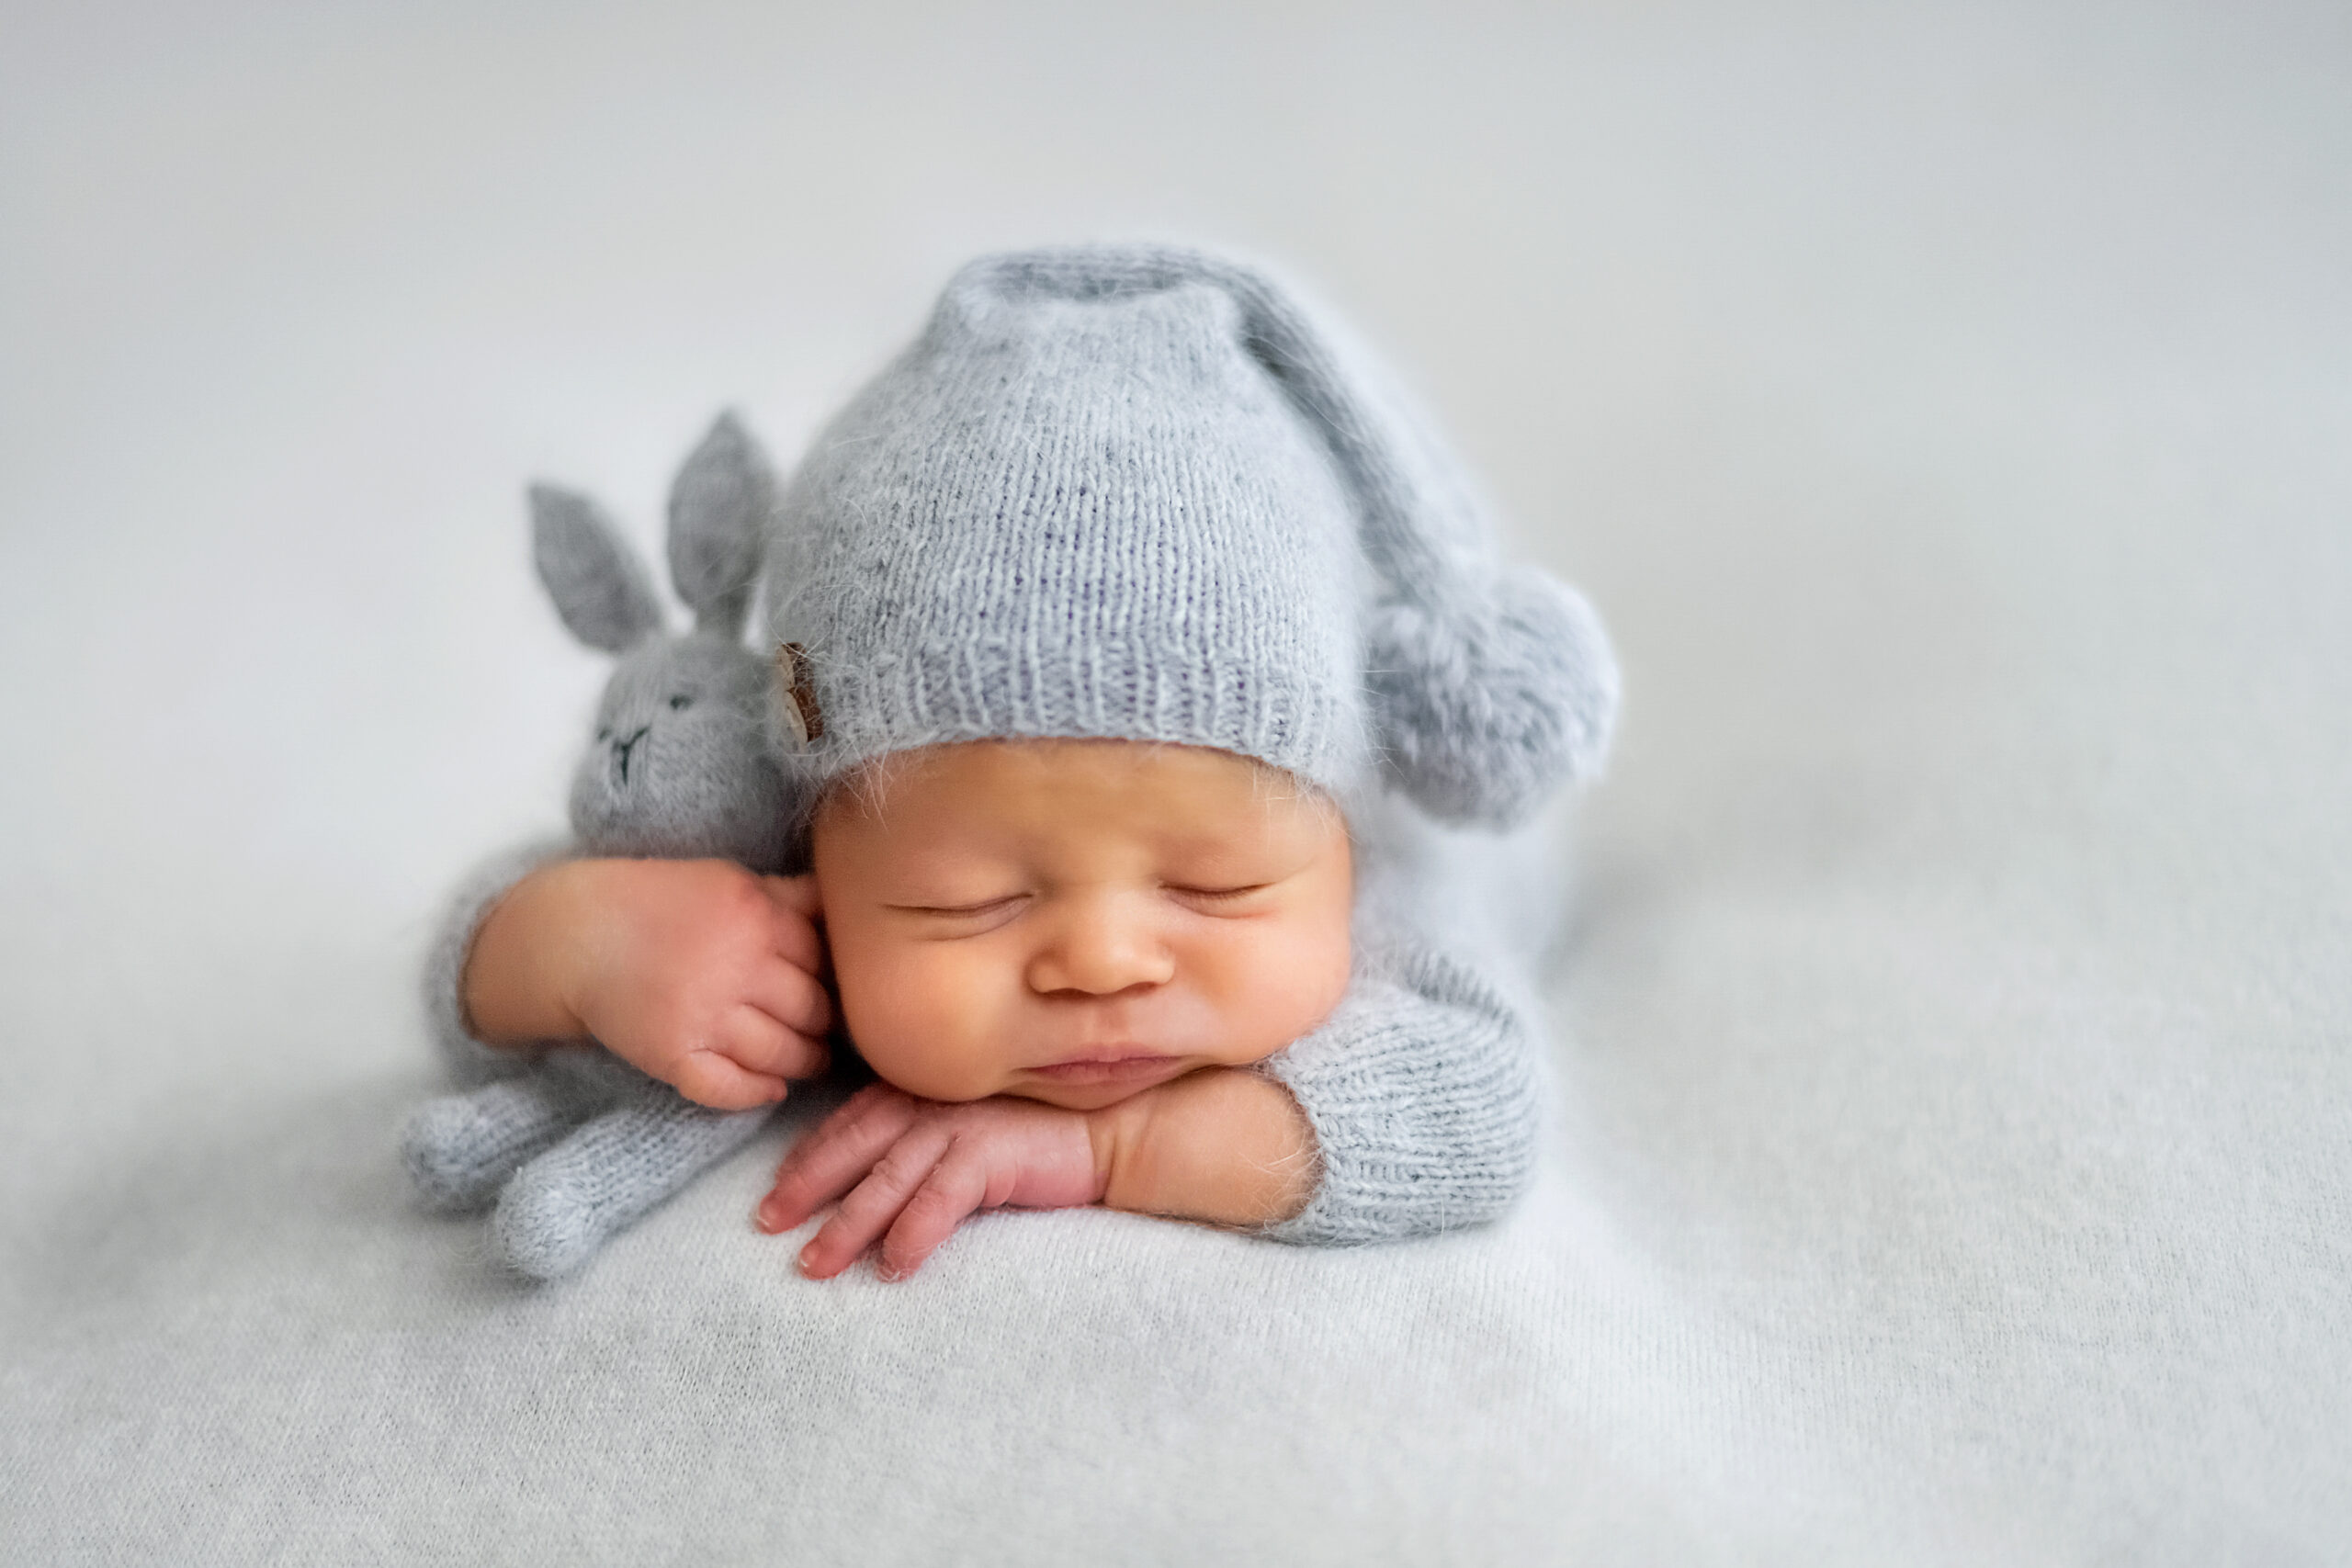 Newborn care involves taking care of a baby during the first few weeks and months of life.